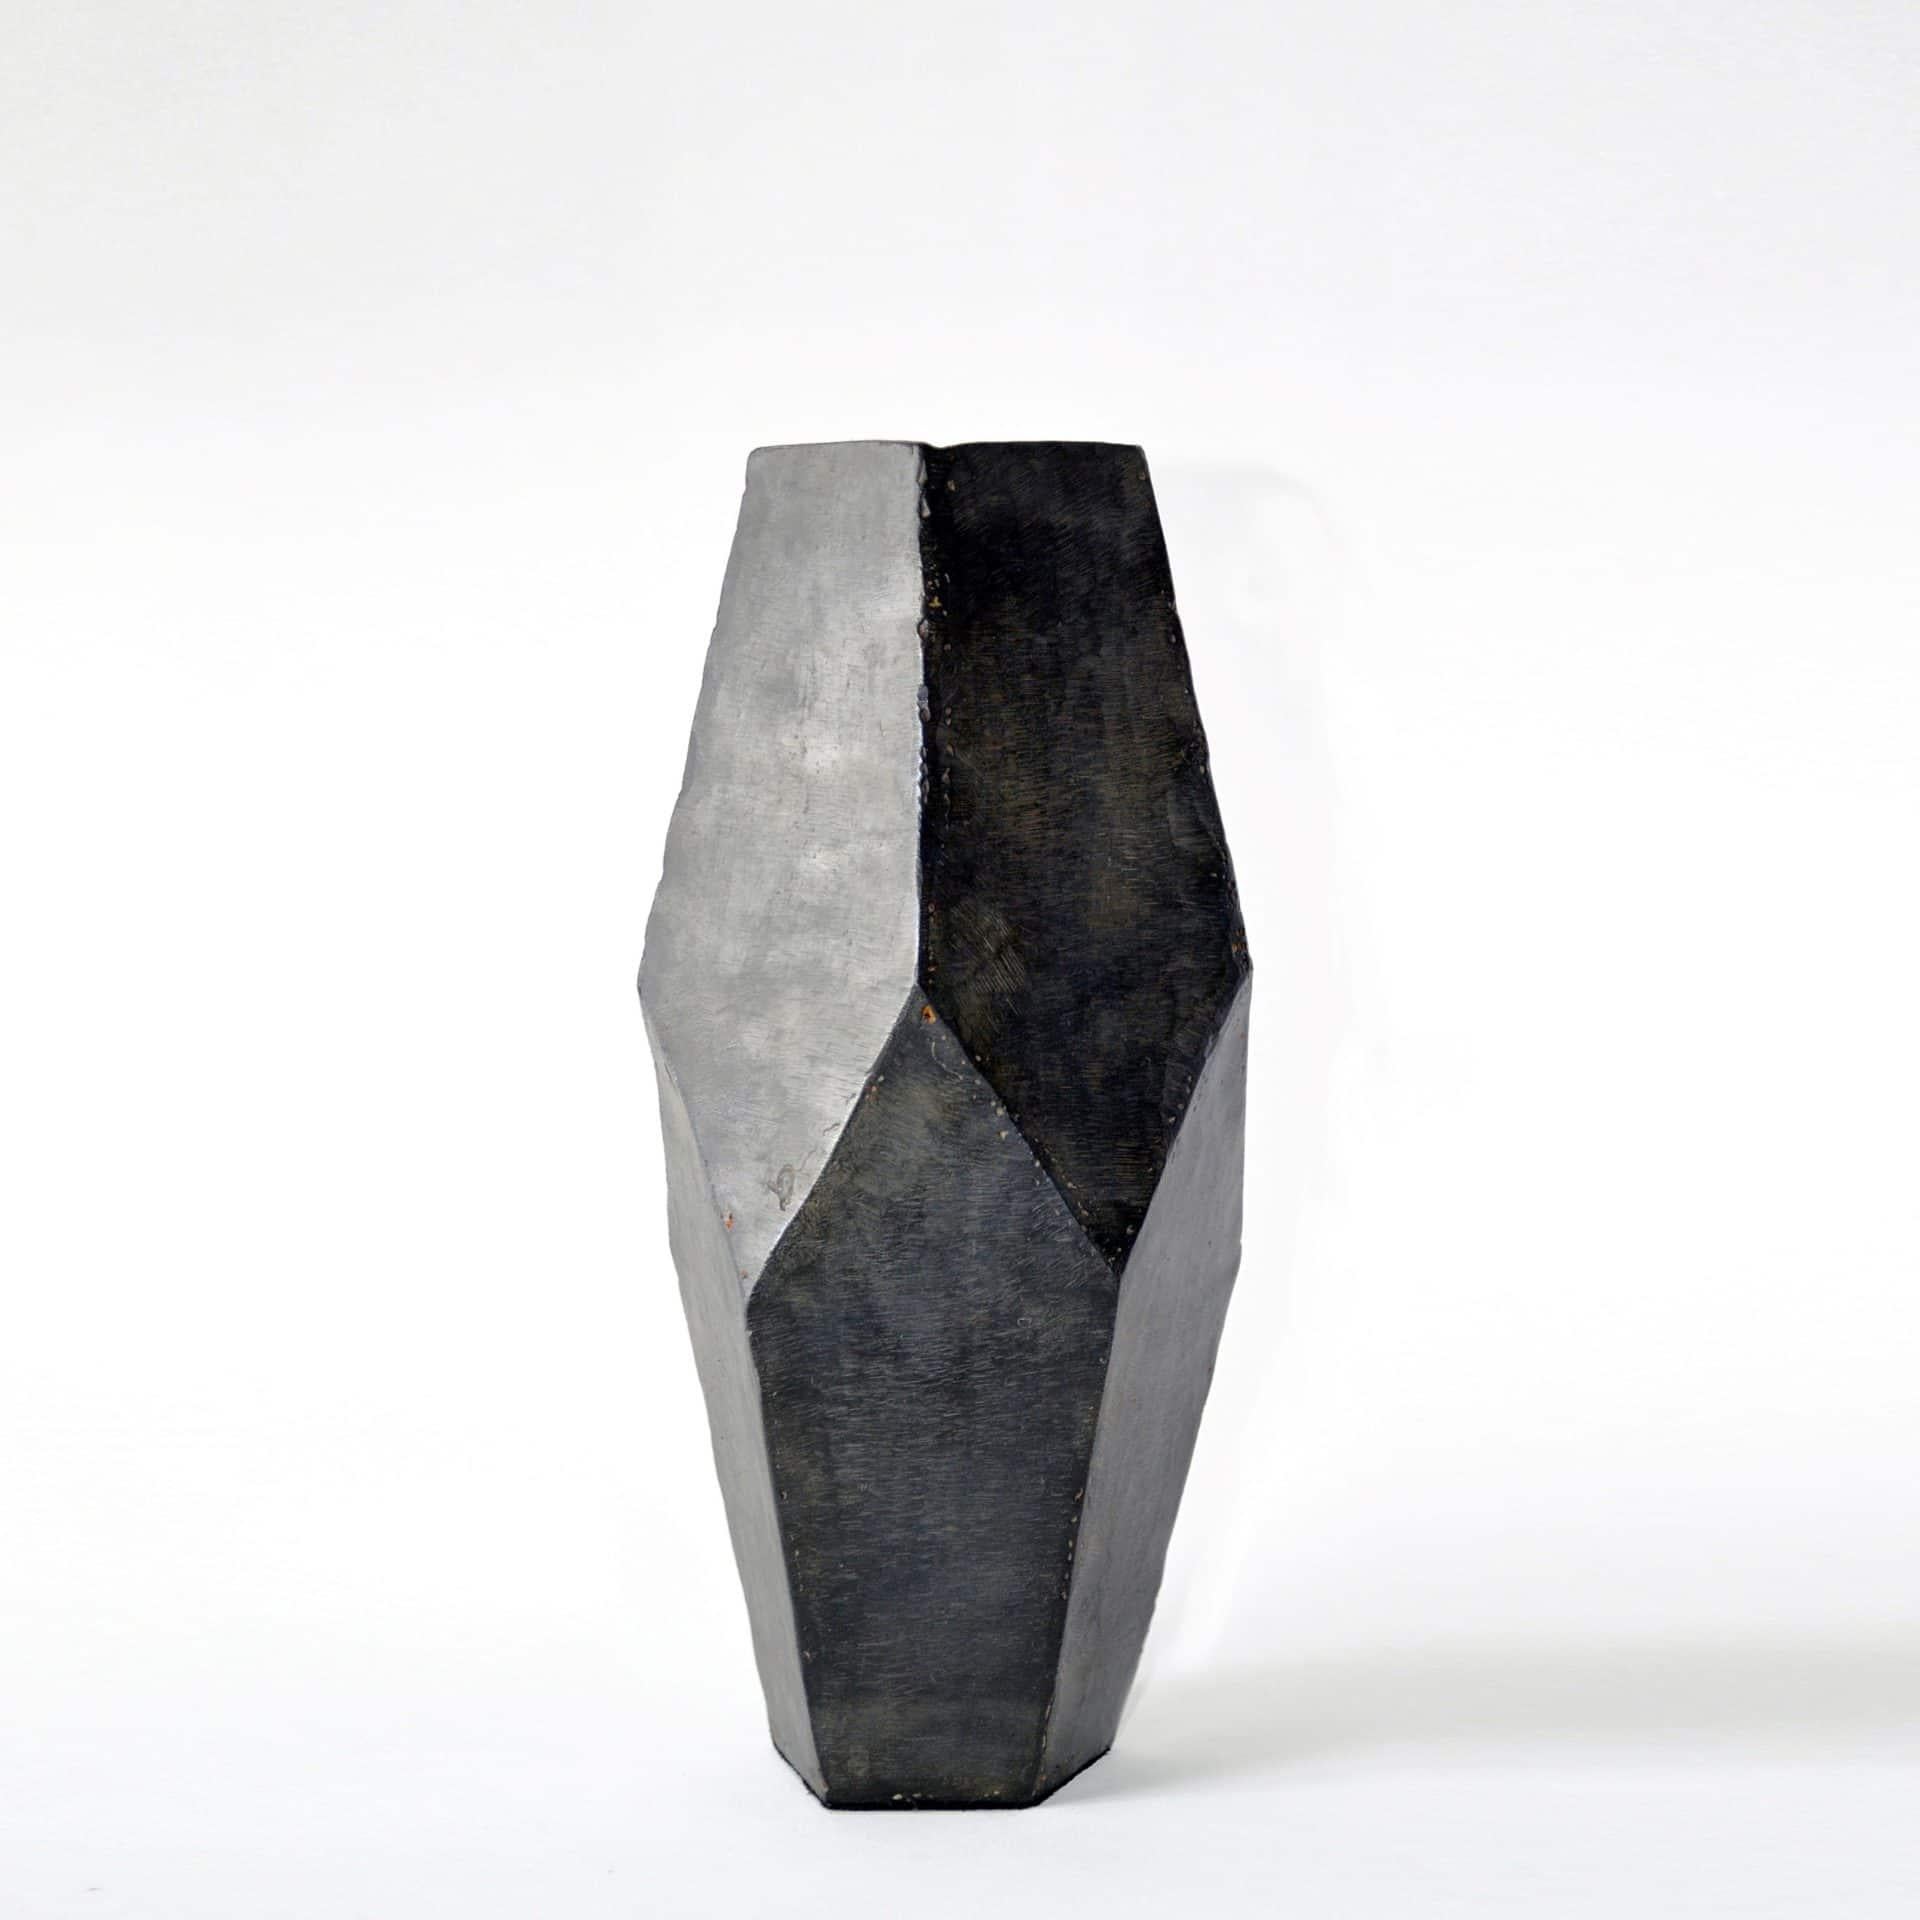 Ten facets form this unique object. Mathematically designed and hand-wrought. Vessel no. 1 was the first vessel designed by J.M. Szymanski.

Blackened steel, waxed finish, suede base.

Each vessel is unique and will vary slightly in size and